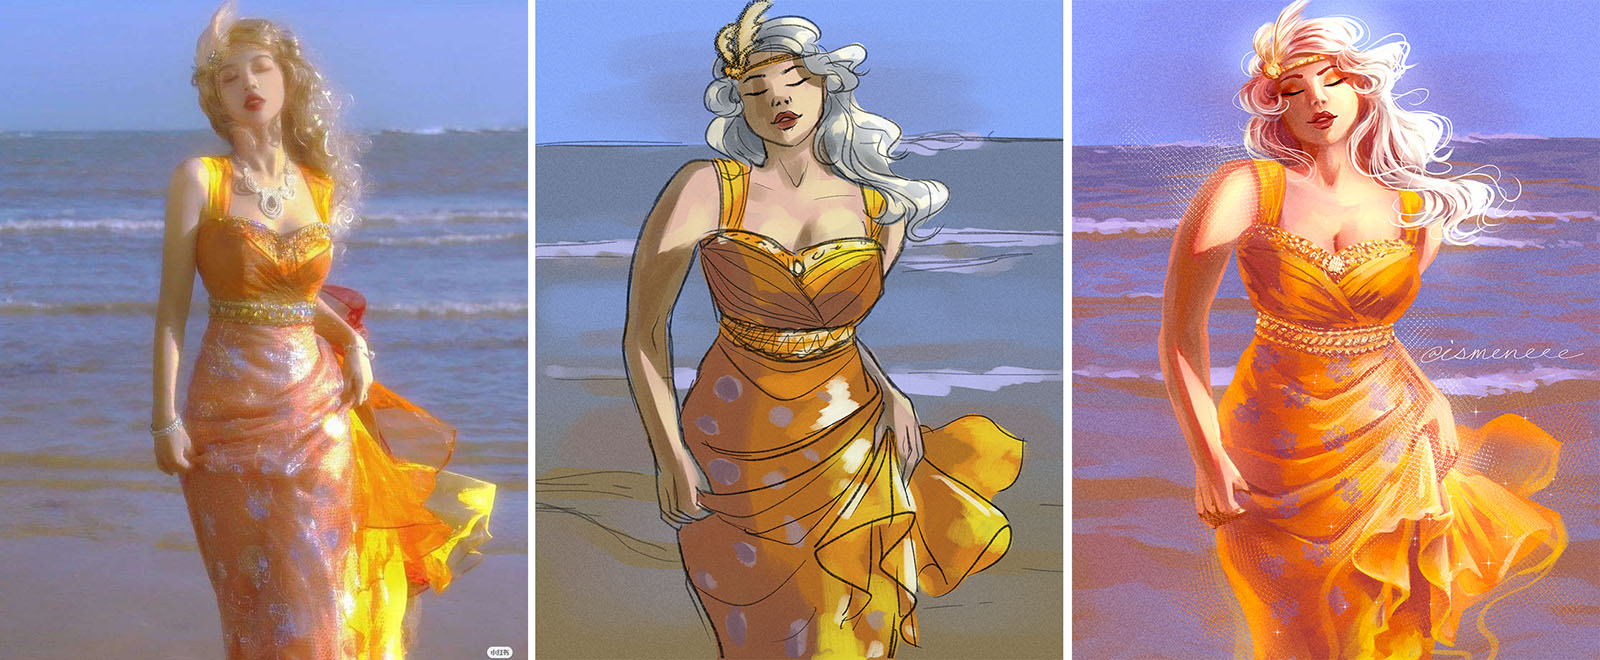 OC Chenmei by Ismene. Orange Dress, Left: The reference photo; centre: a sketch plus rough colors; right: the finished drawing.